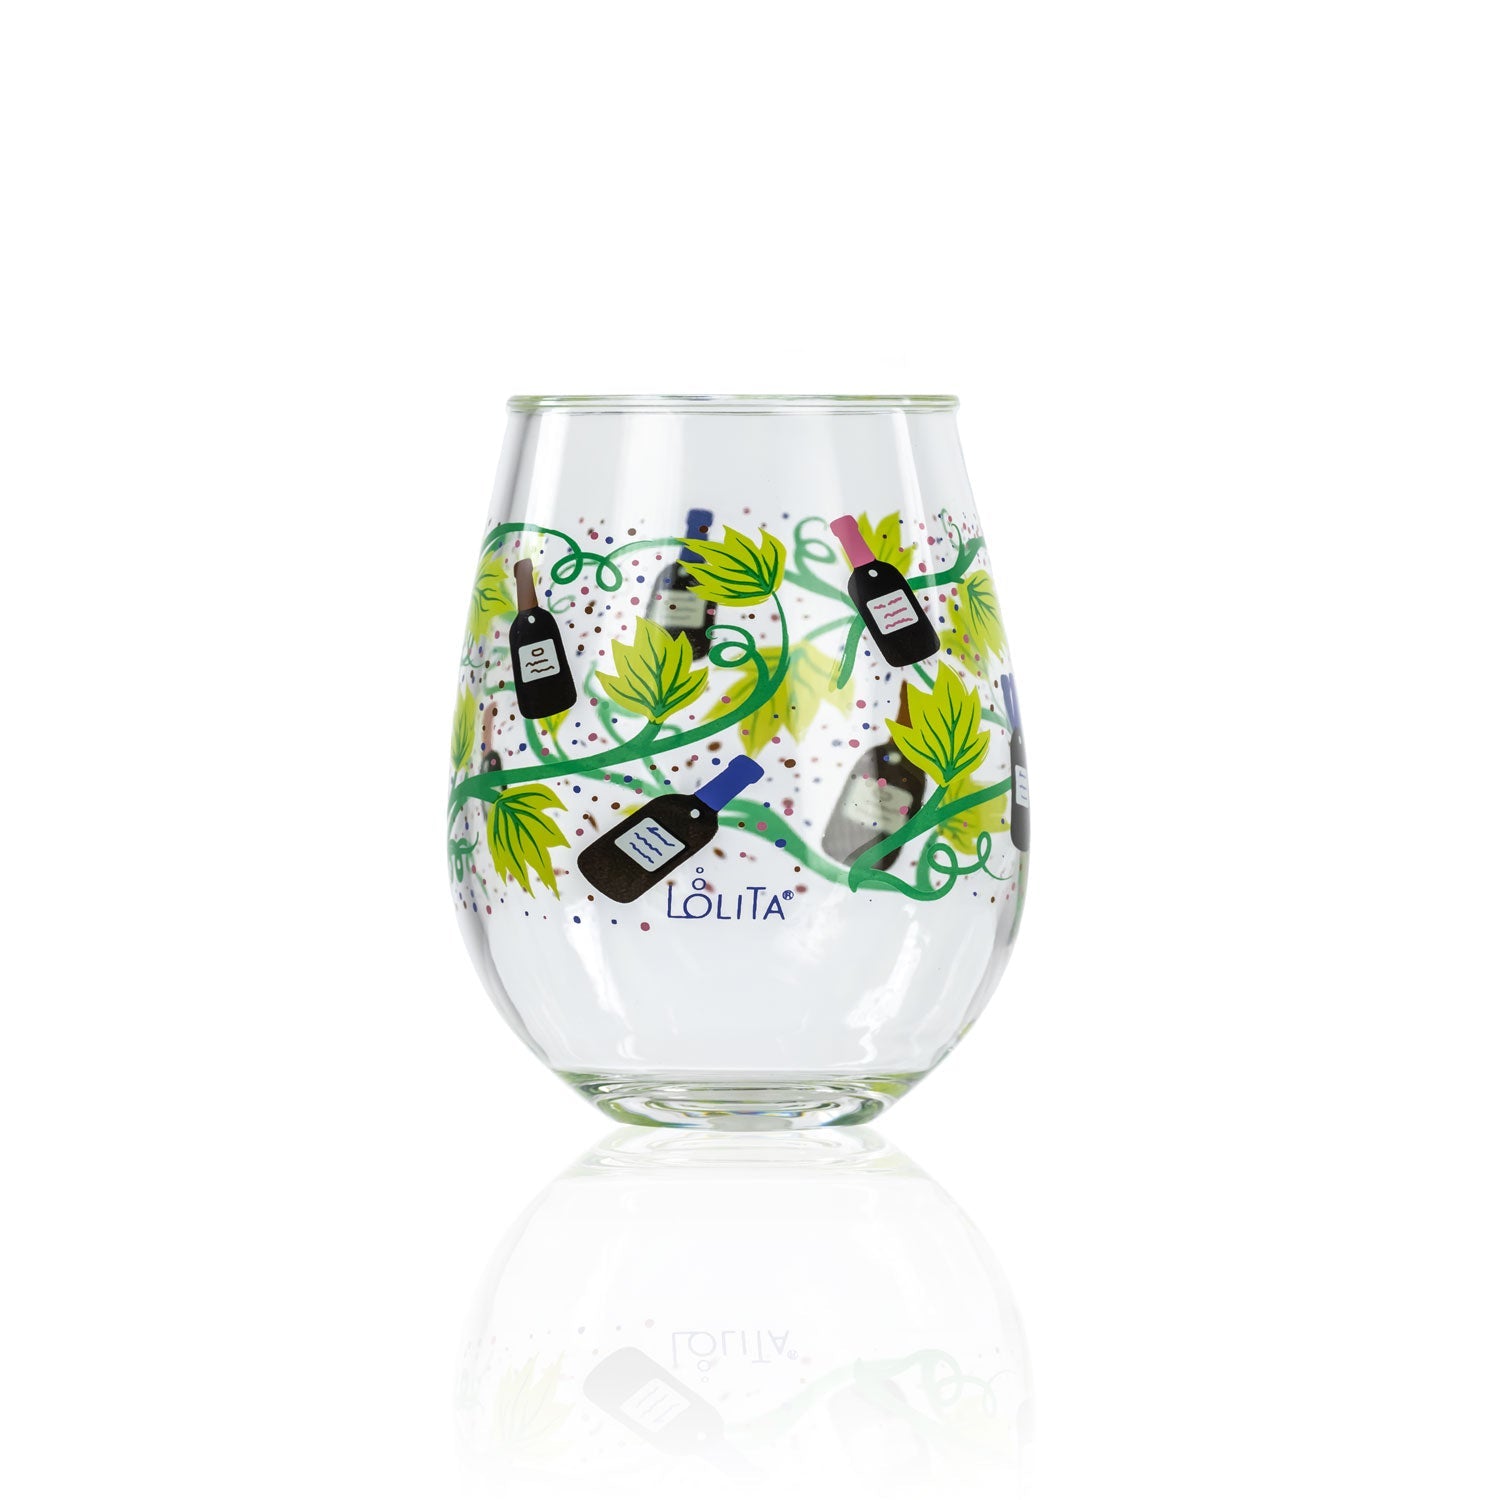 Party To Go by Lolita Wine Tasting 15oz Acrylic Stemless Wine Glasses